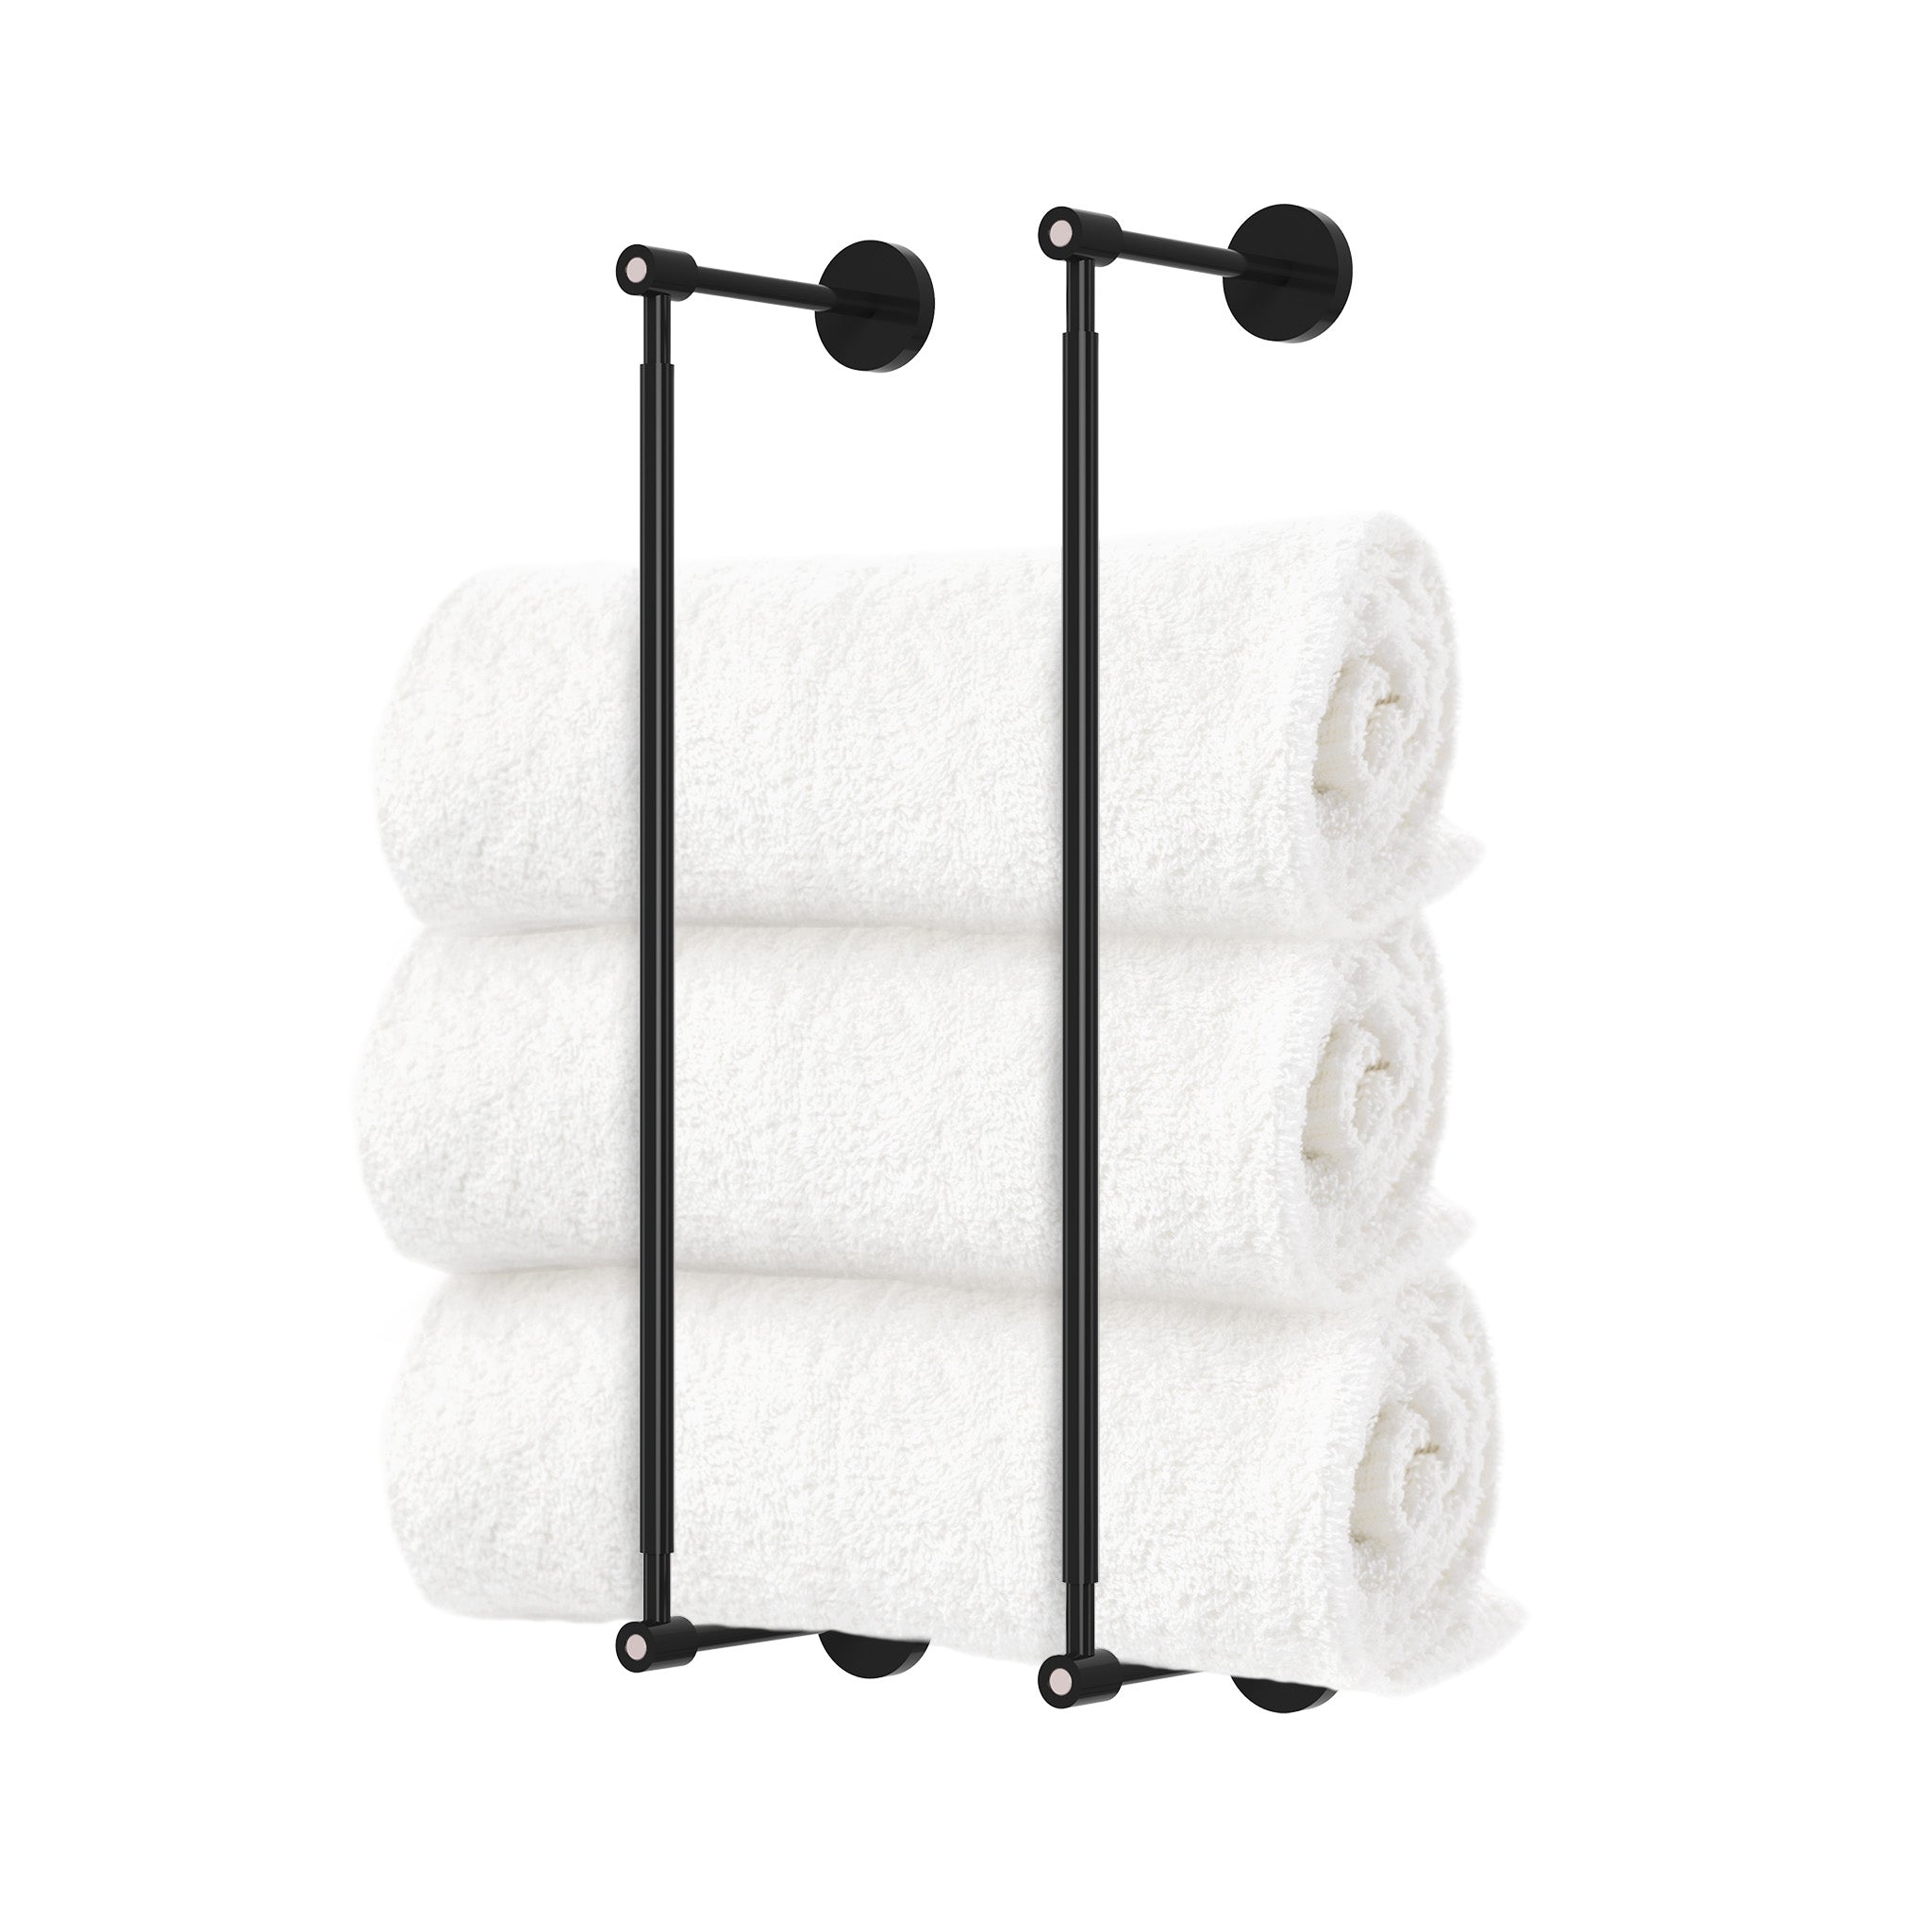 Black and barely head towel rack 18 inch dutton brown hardware